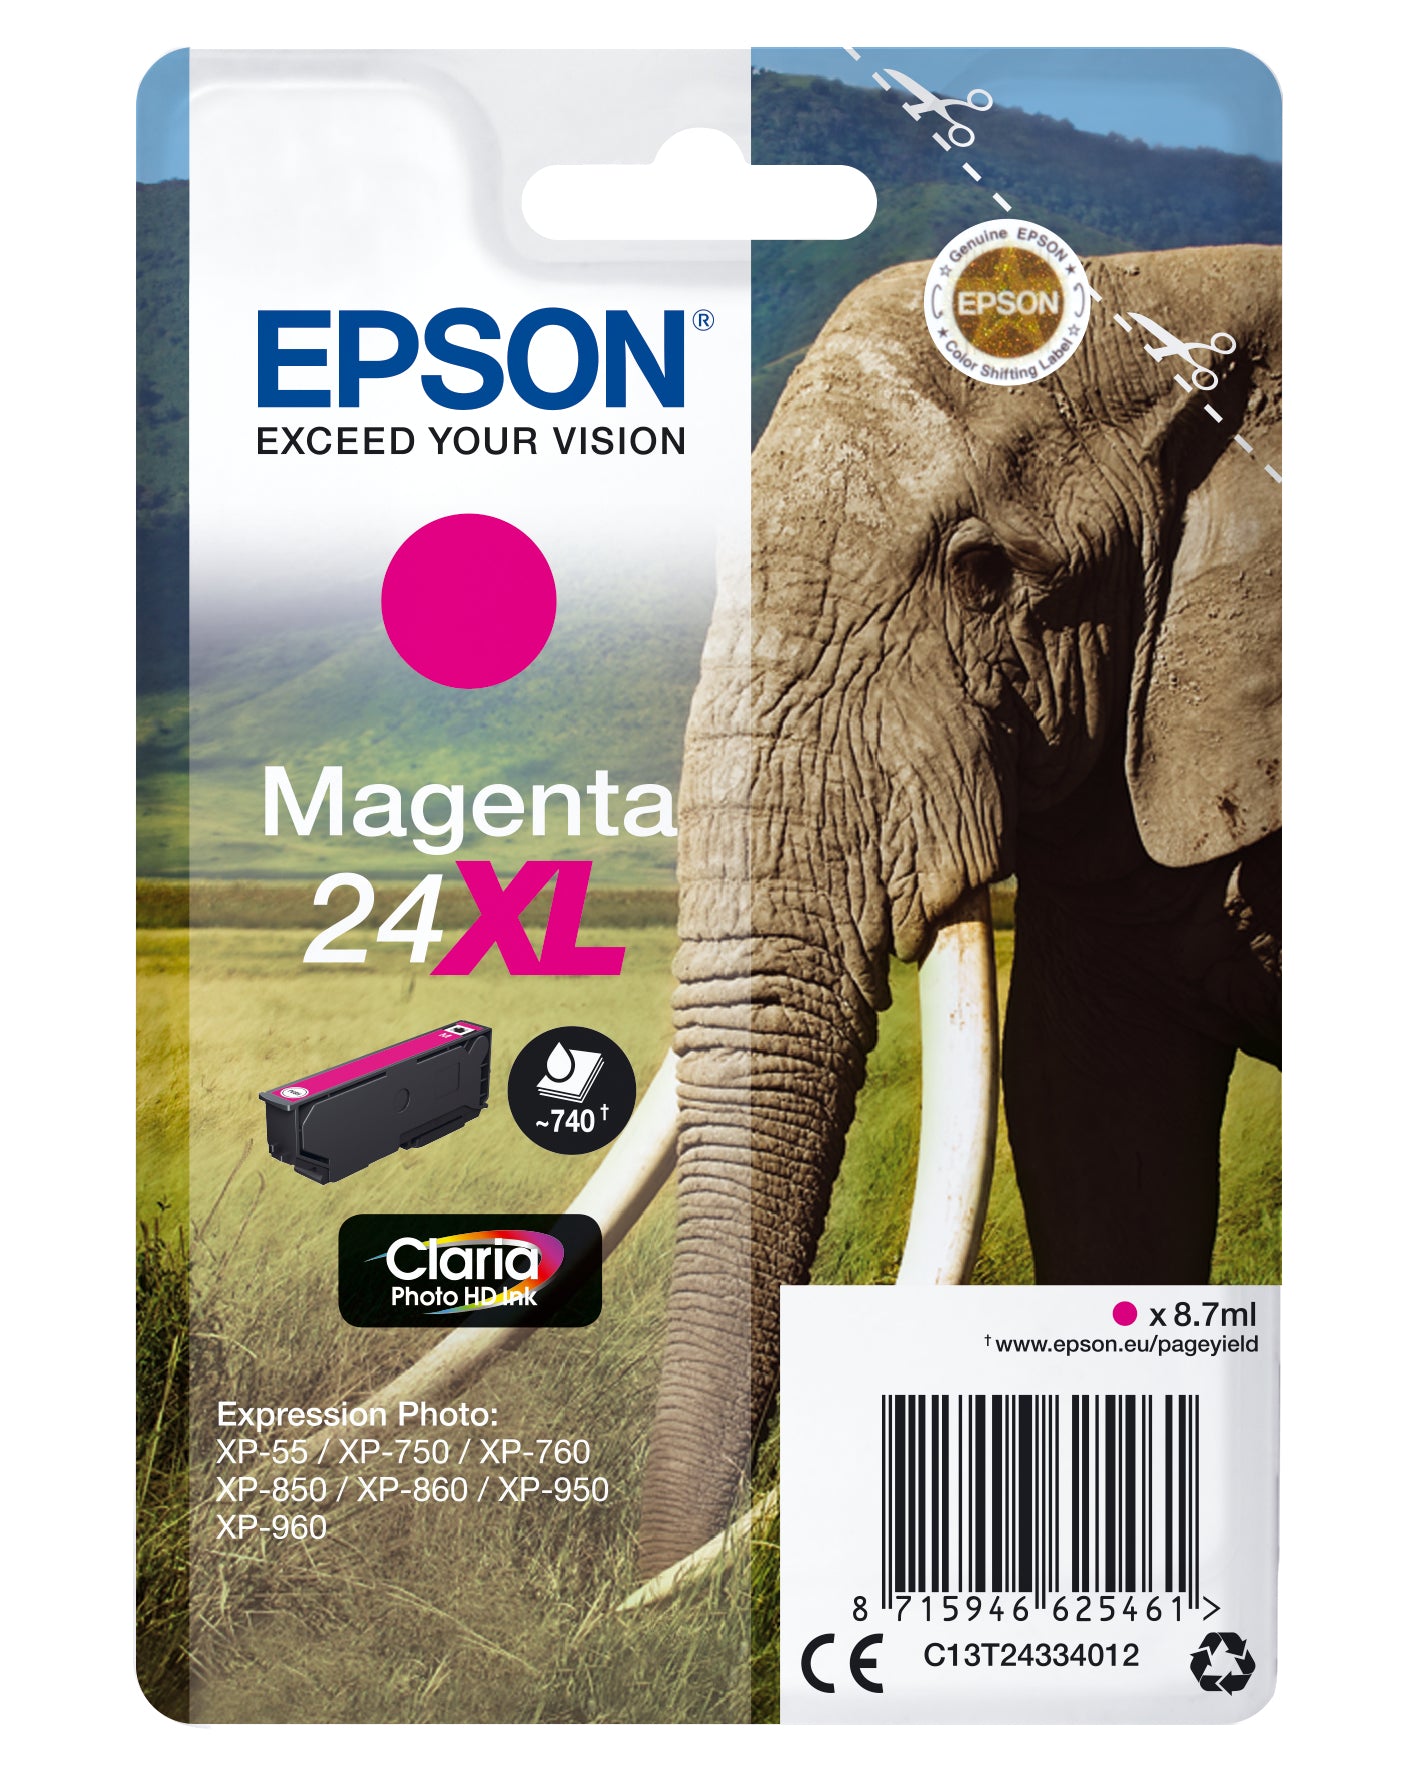 Epson C13T24334012/24XL Ink cartridge magenta high-capacity, 500 pages 8,7ml for Epson XP 750